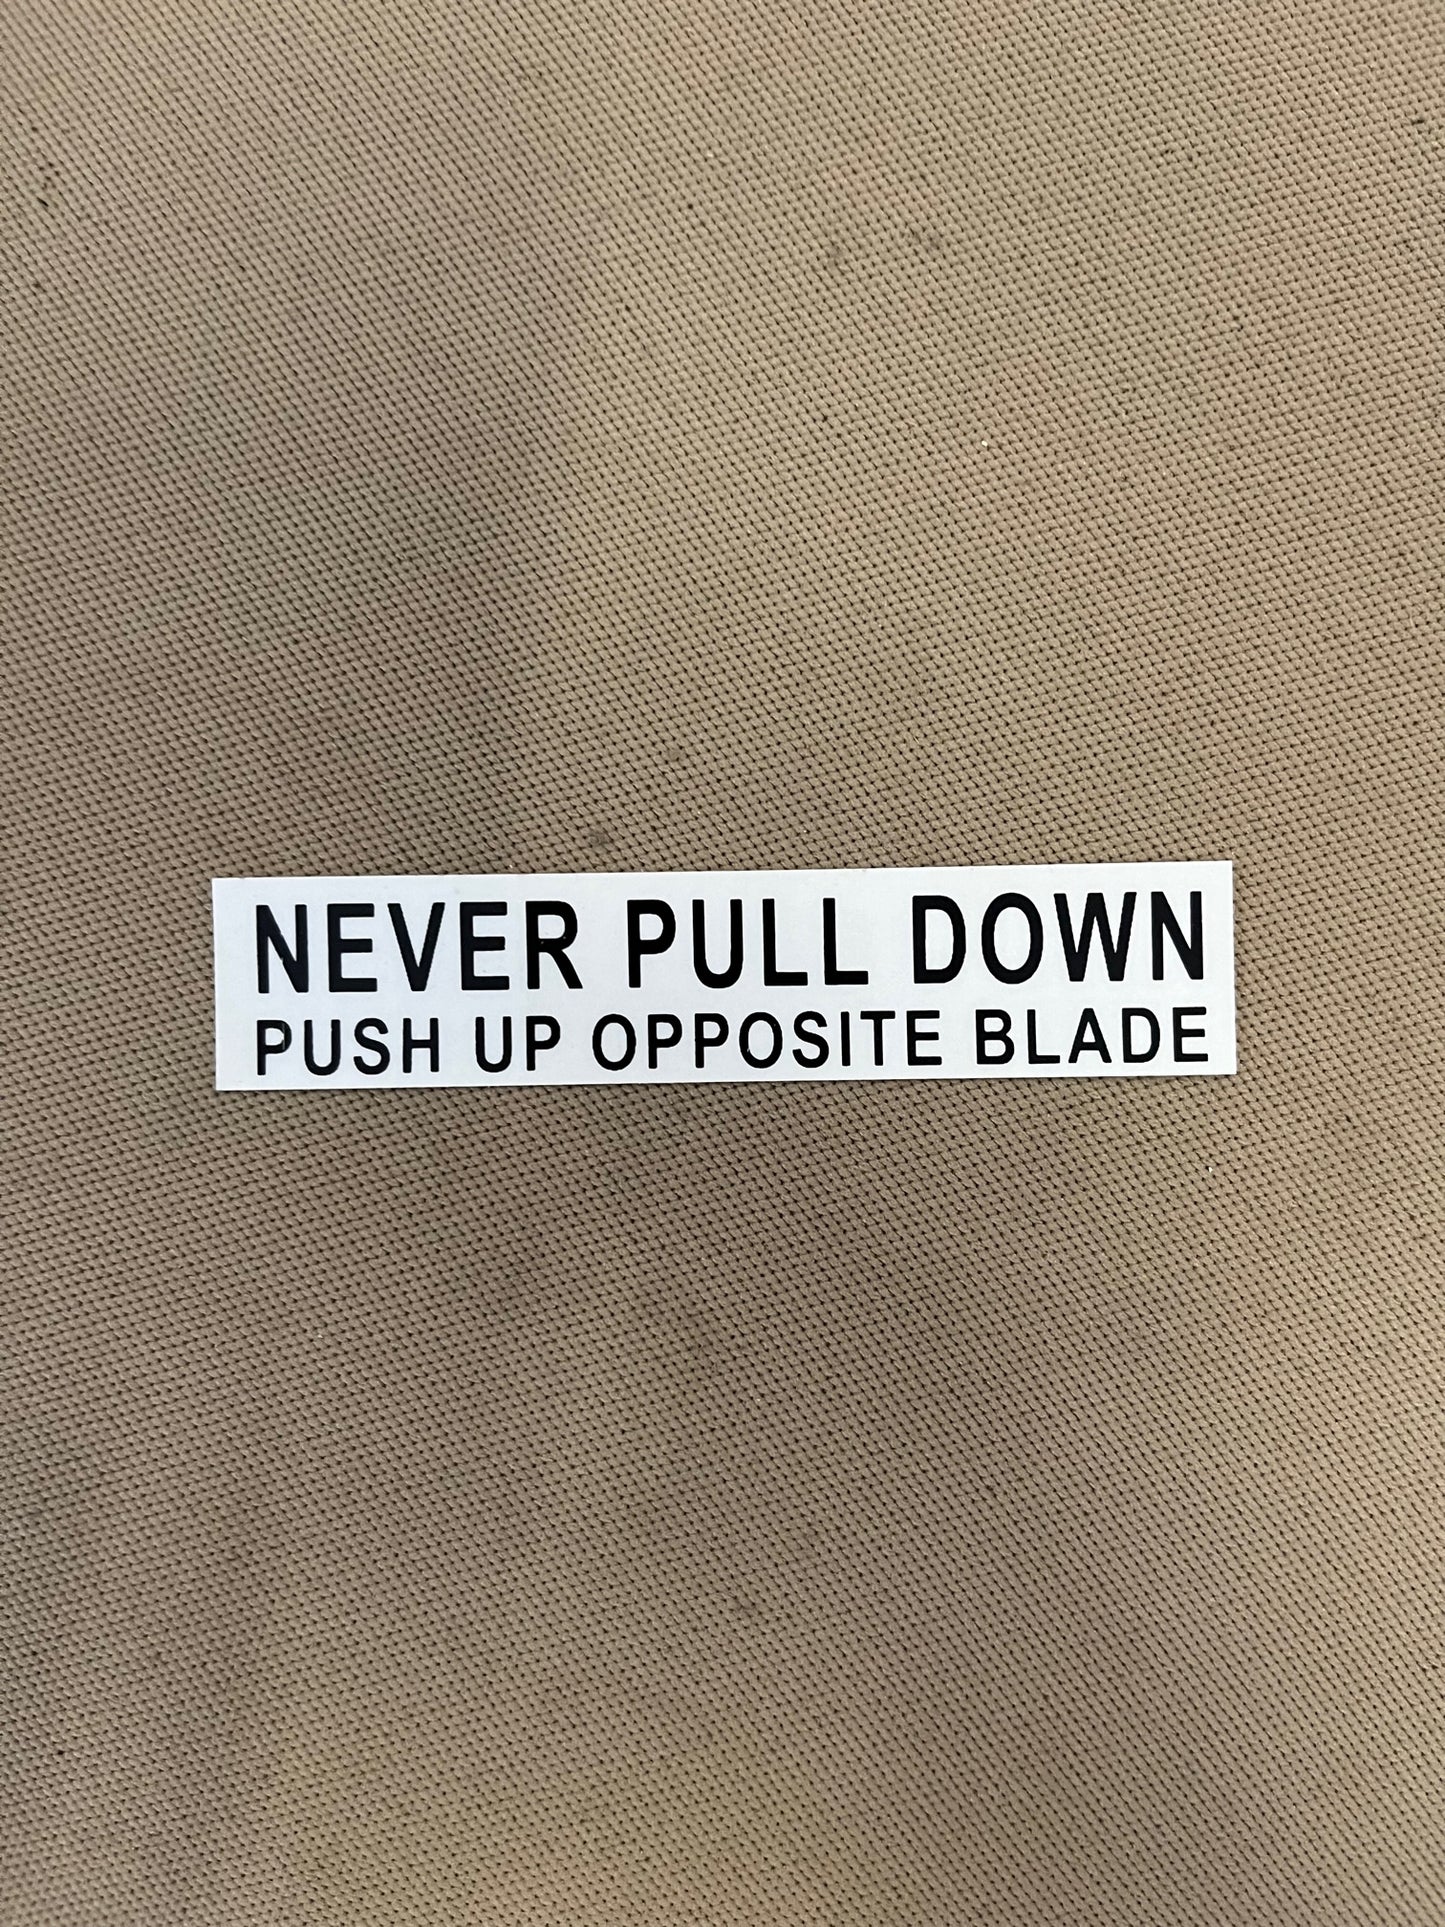 A654-25 DECAL "NEVER PULL DOWN"